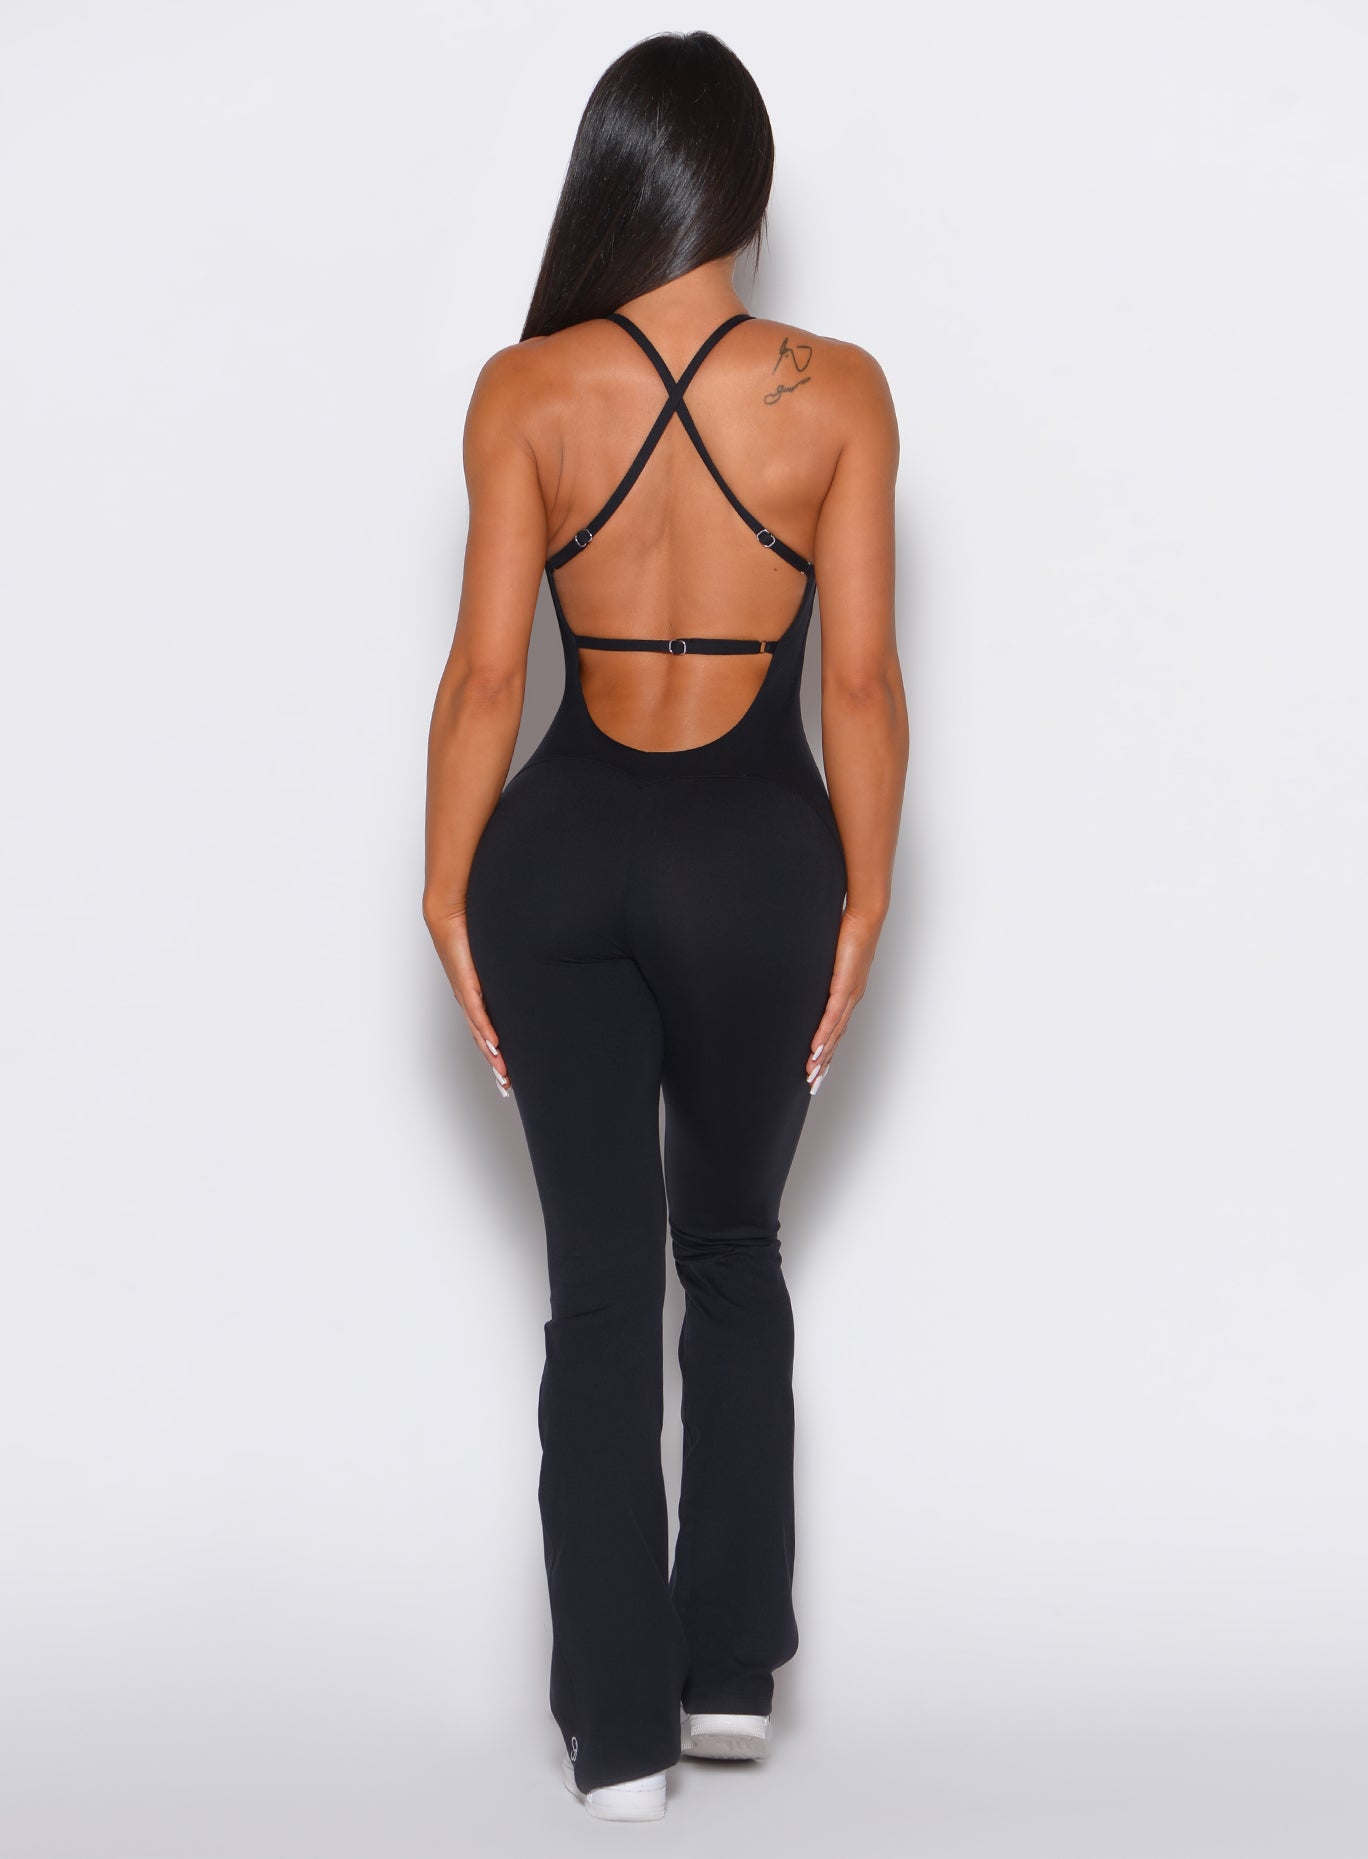 back profile view of a model wearing our black bombshell bunny bodysuit